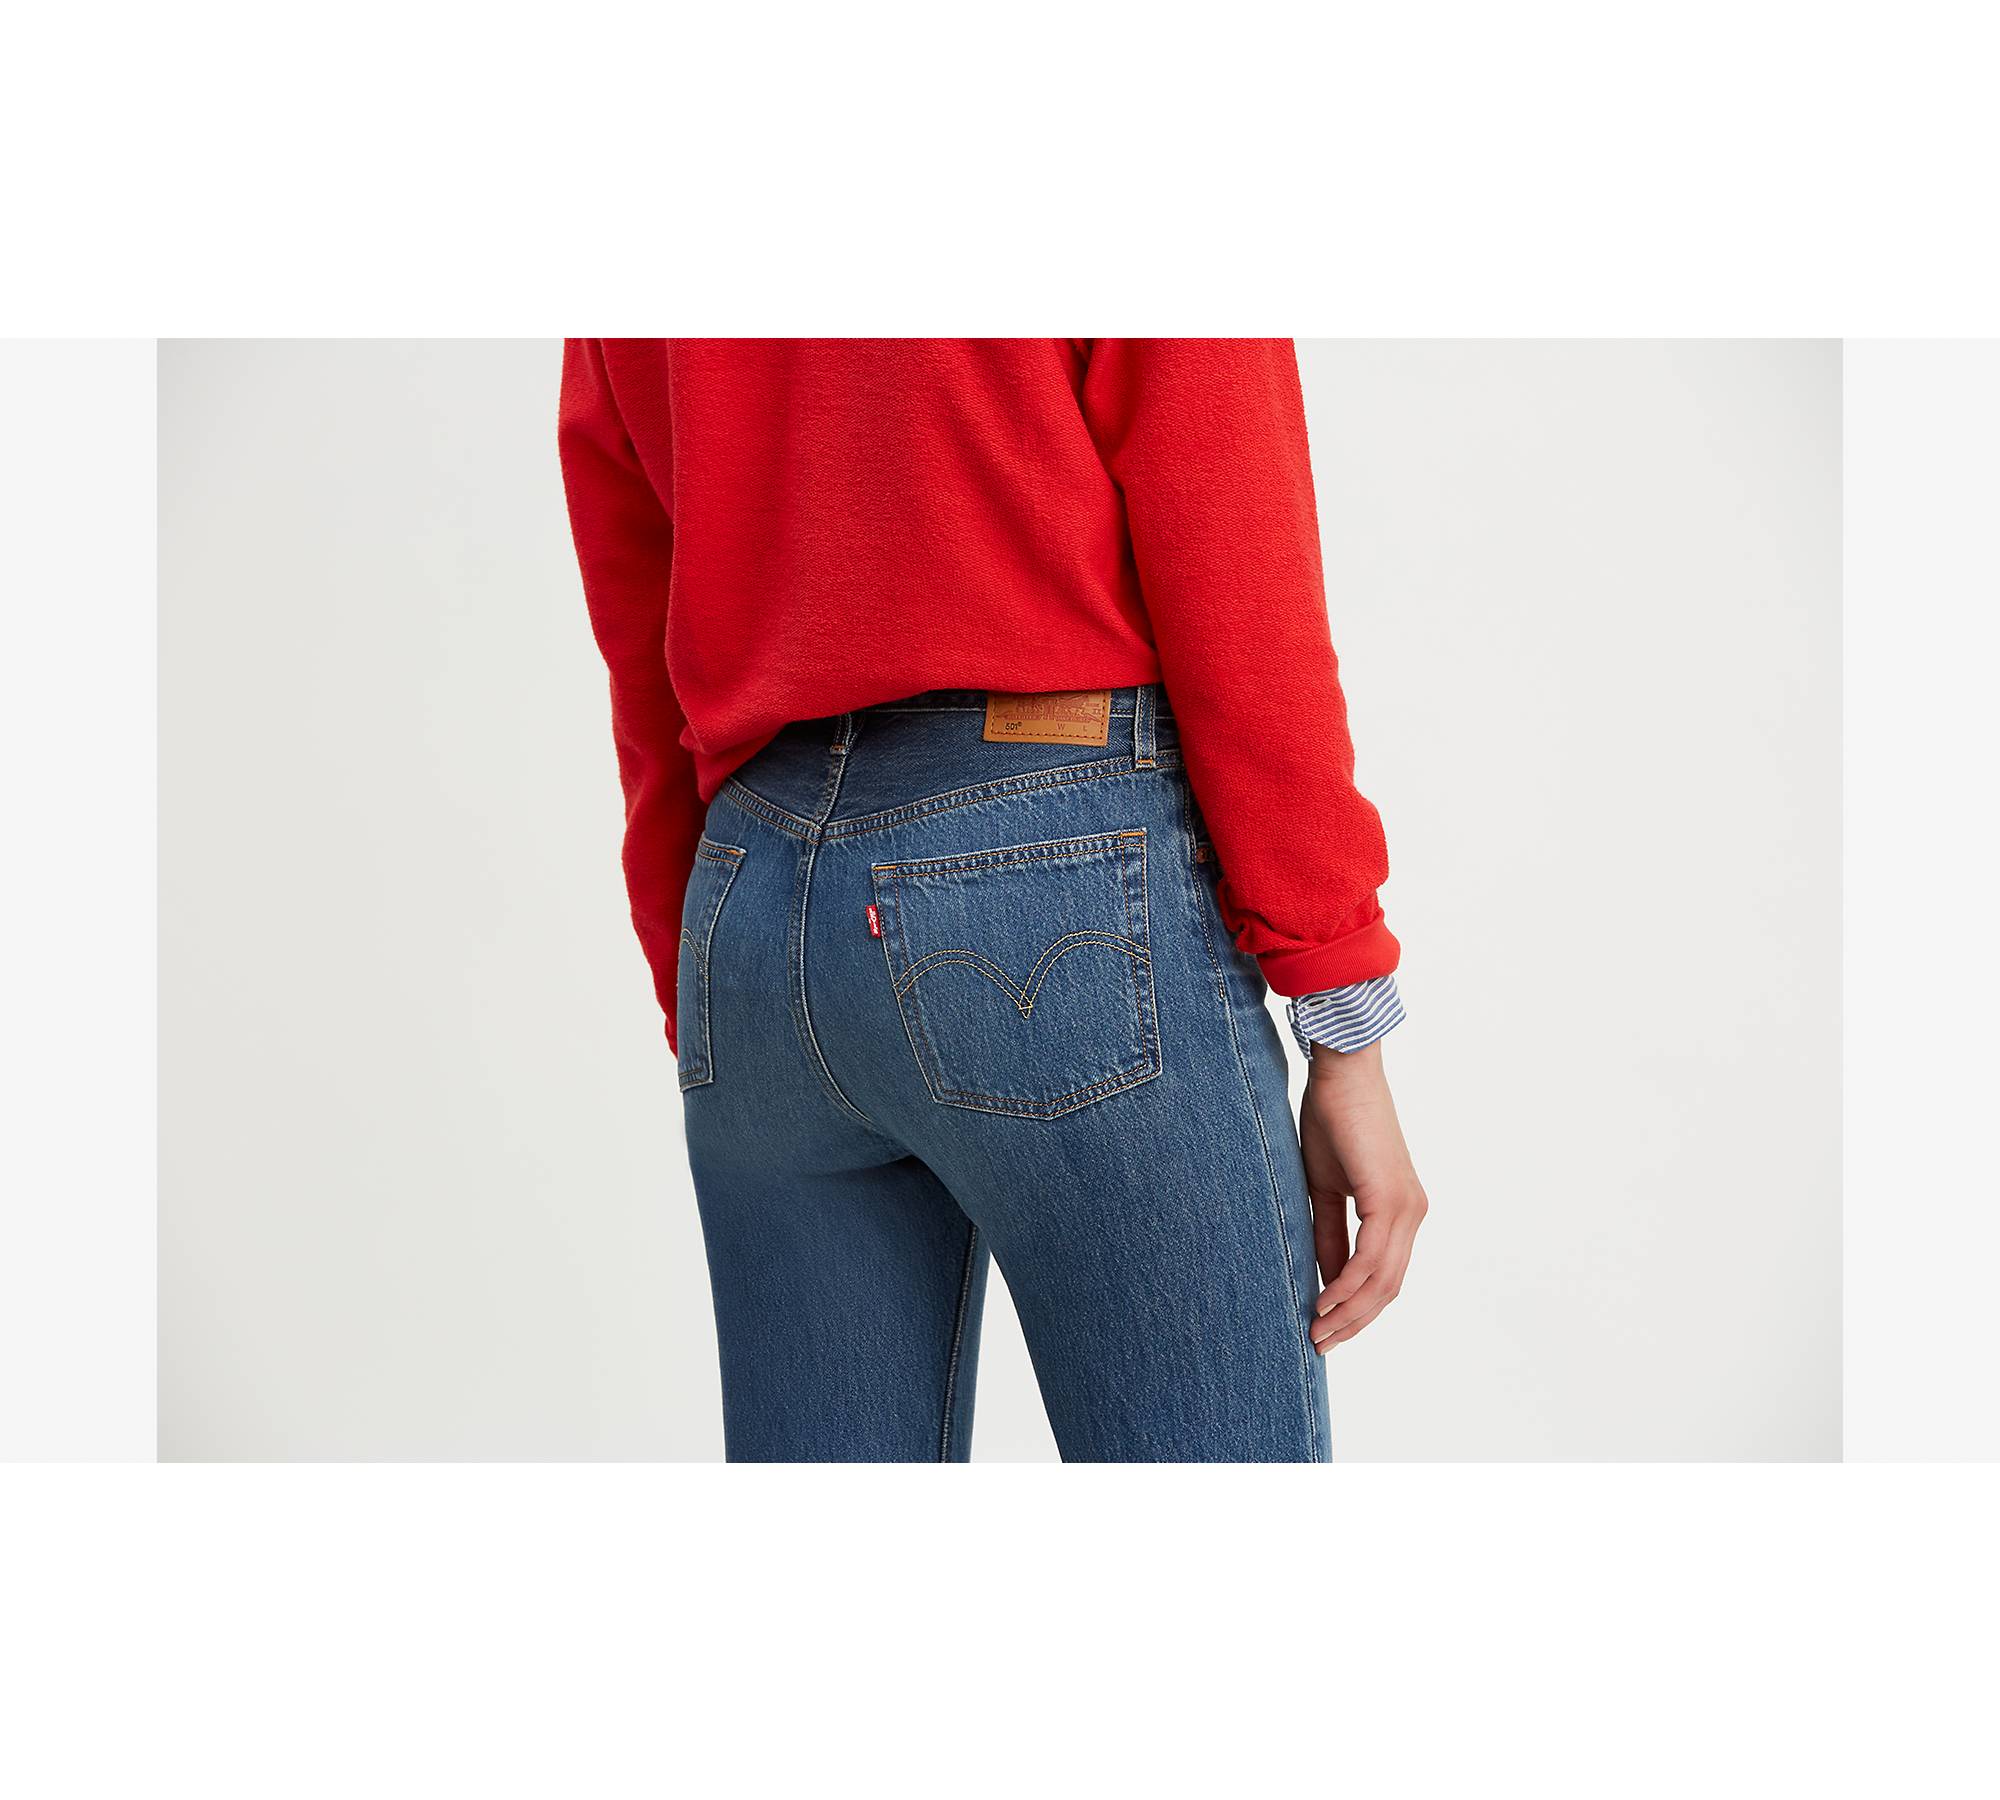 Jeans Mujer 501 Original Fit Azul Oscuro Levis 12501-0395 - Jeans